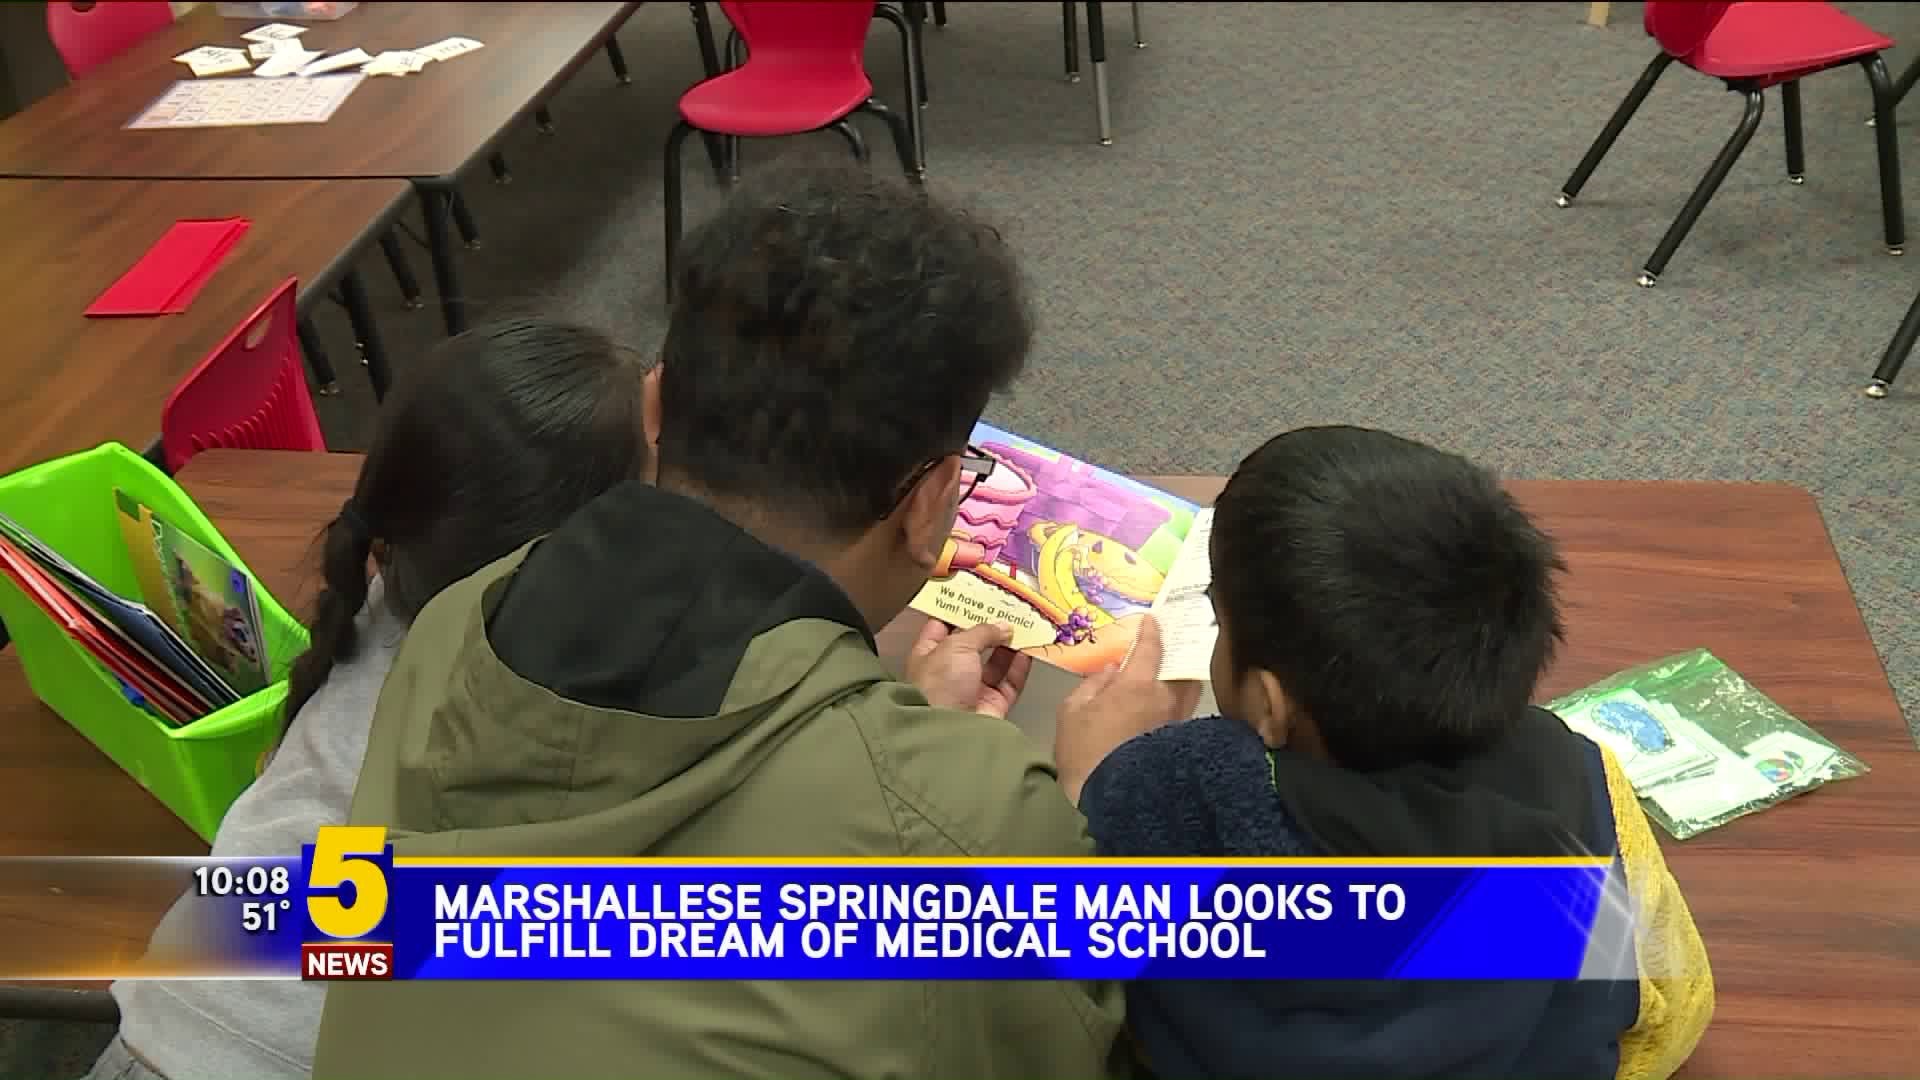 Marshallese Springdale Man Looks To Fulfill Dream Of Medical School